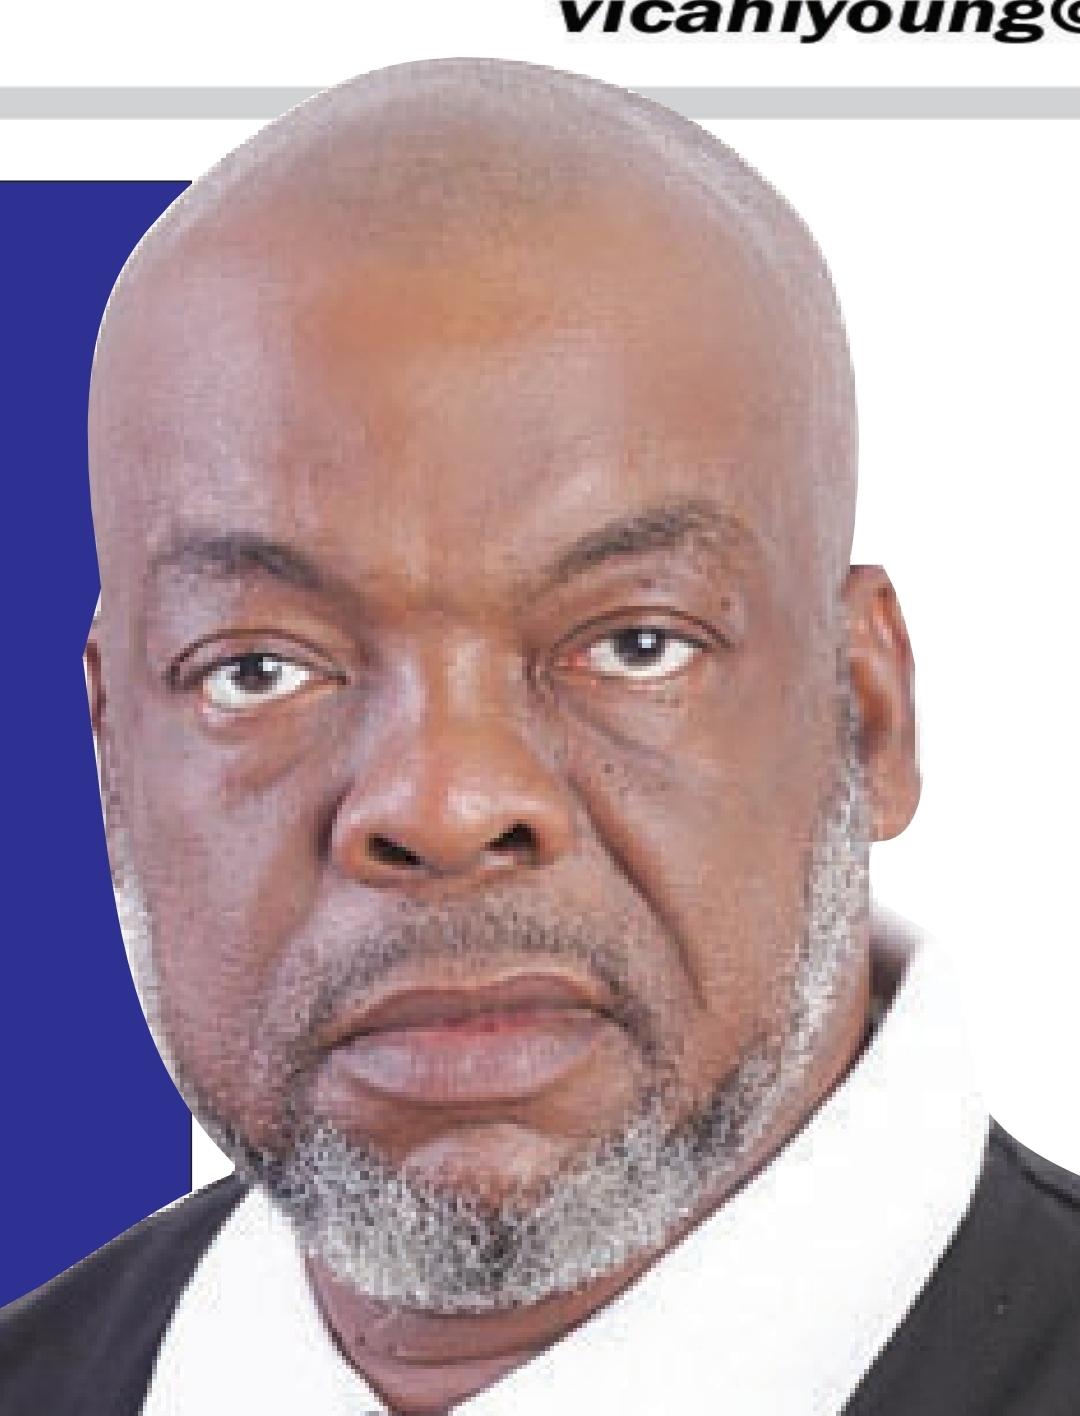 Why there’re incessant strikes in Nigeria — Ex-Labour Minister, Wogu